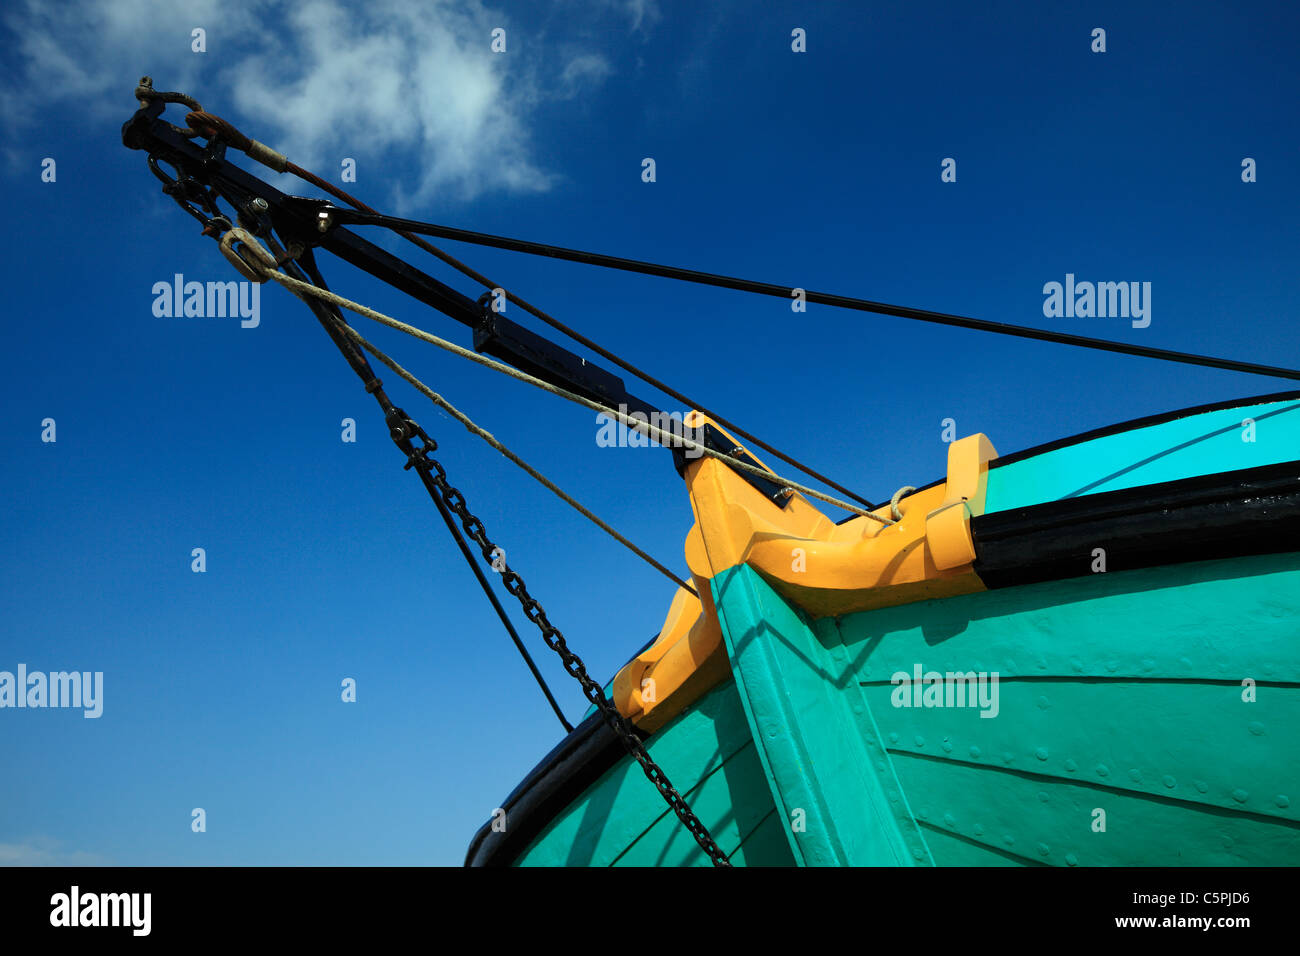 Bow of an old Thames Barge. Stock Photo